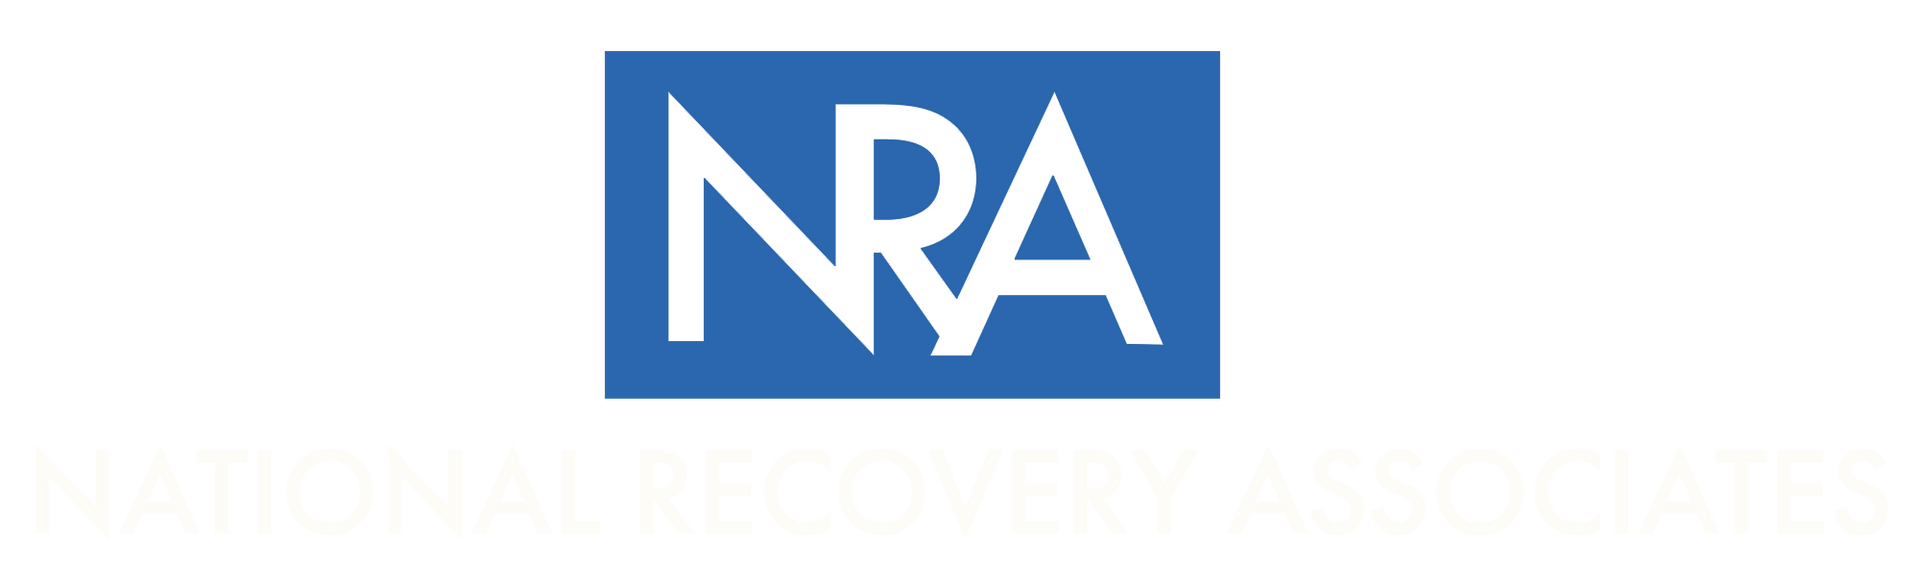 A blue and white nra logo on a white background.